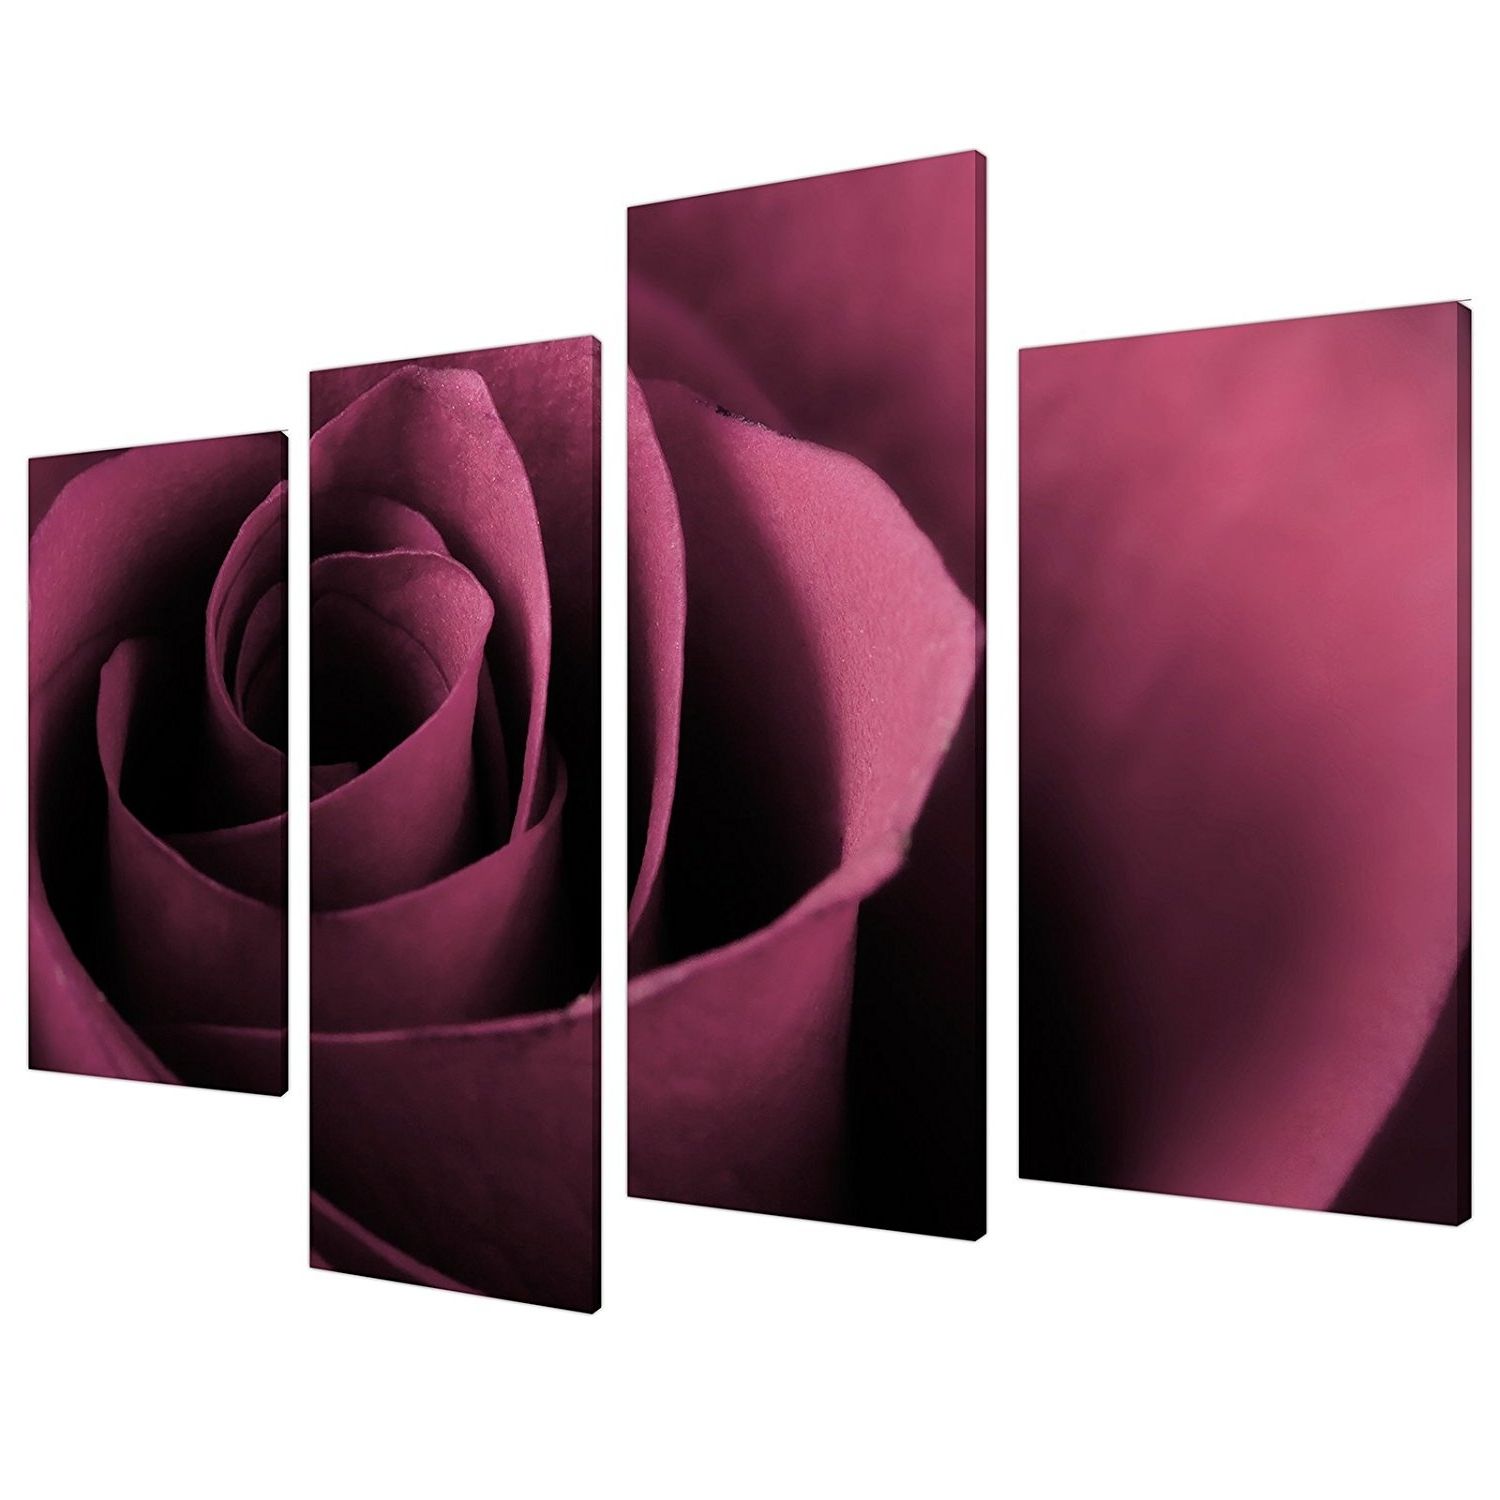 Favorite Large Plum Flowers Rose Floral Canvas Wall Art Pictures Prints Xl Intended For Plum Wall Art (View 1 of 15)